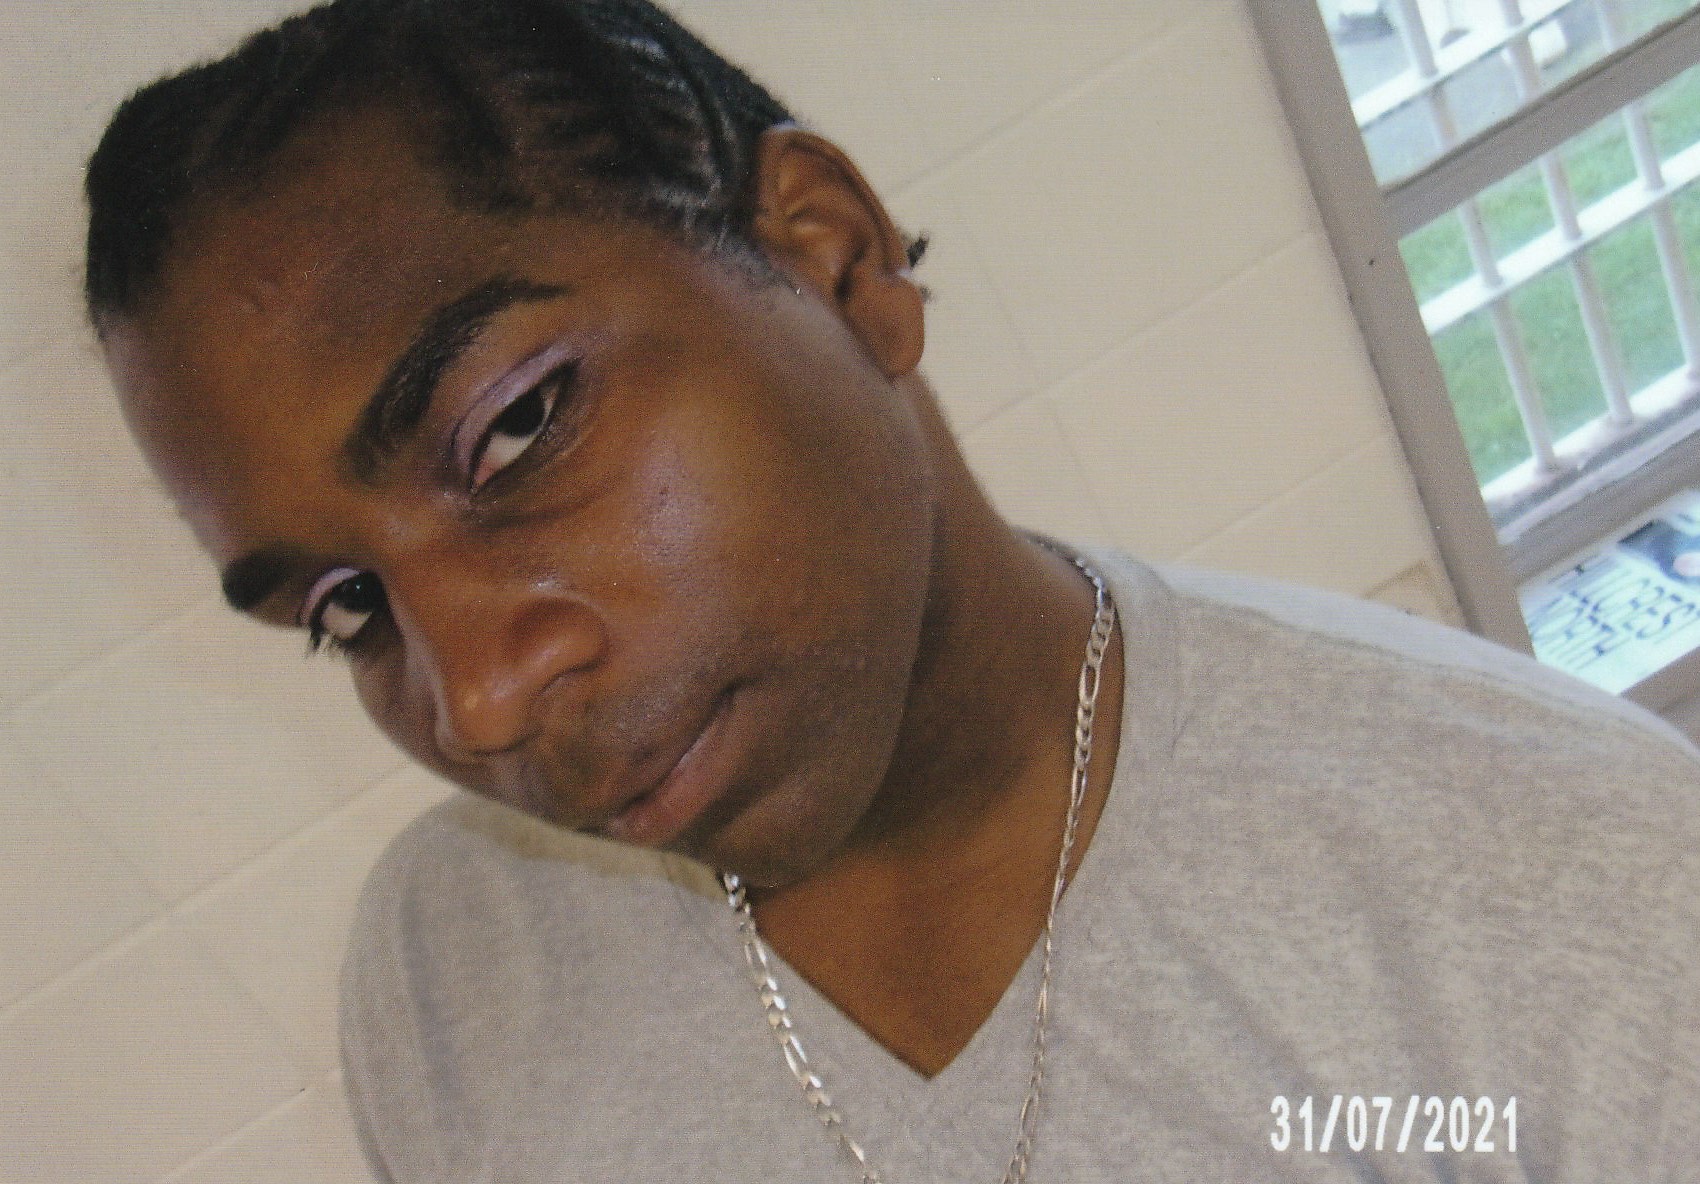 The transgender woman who impregnated 2 women in prison now fears for her life Opinion photo